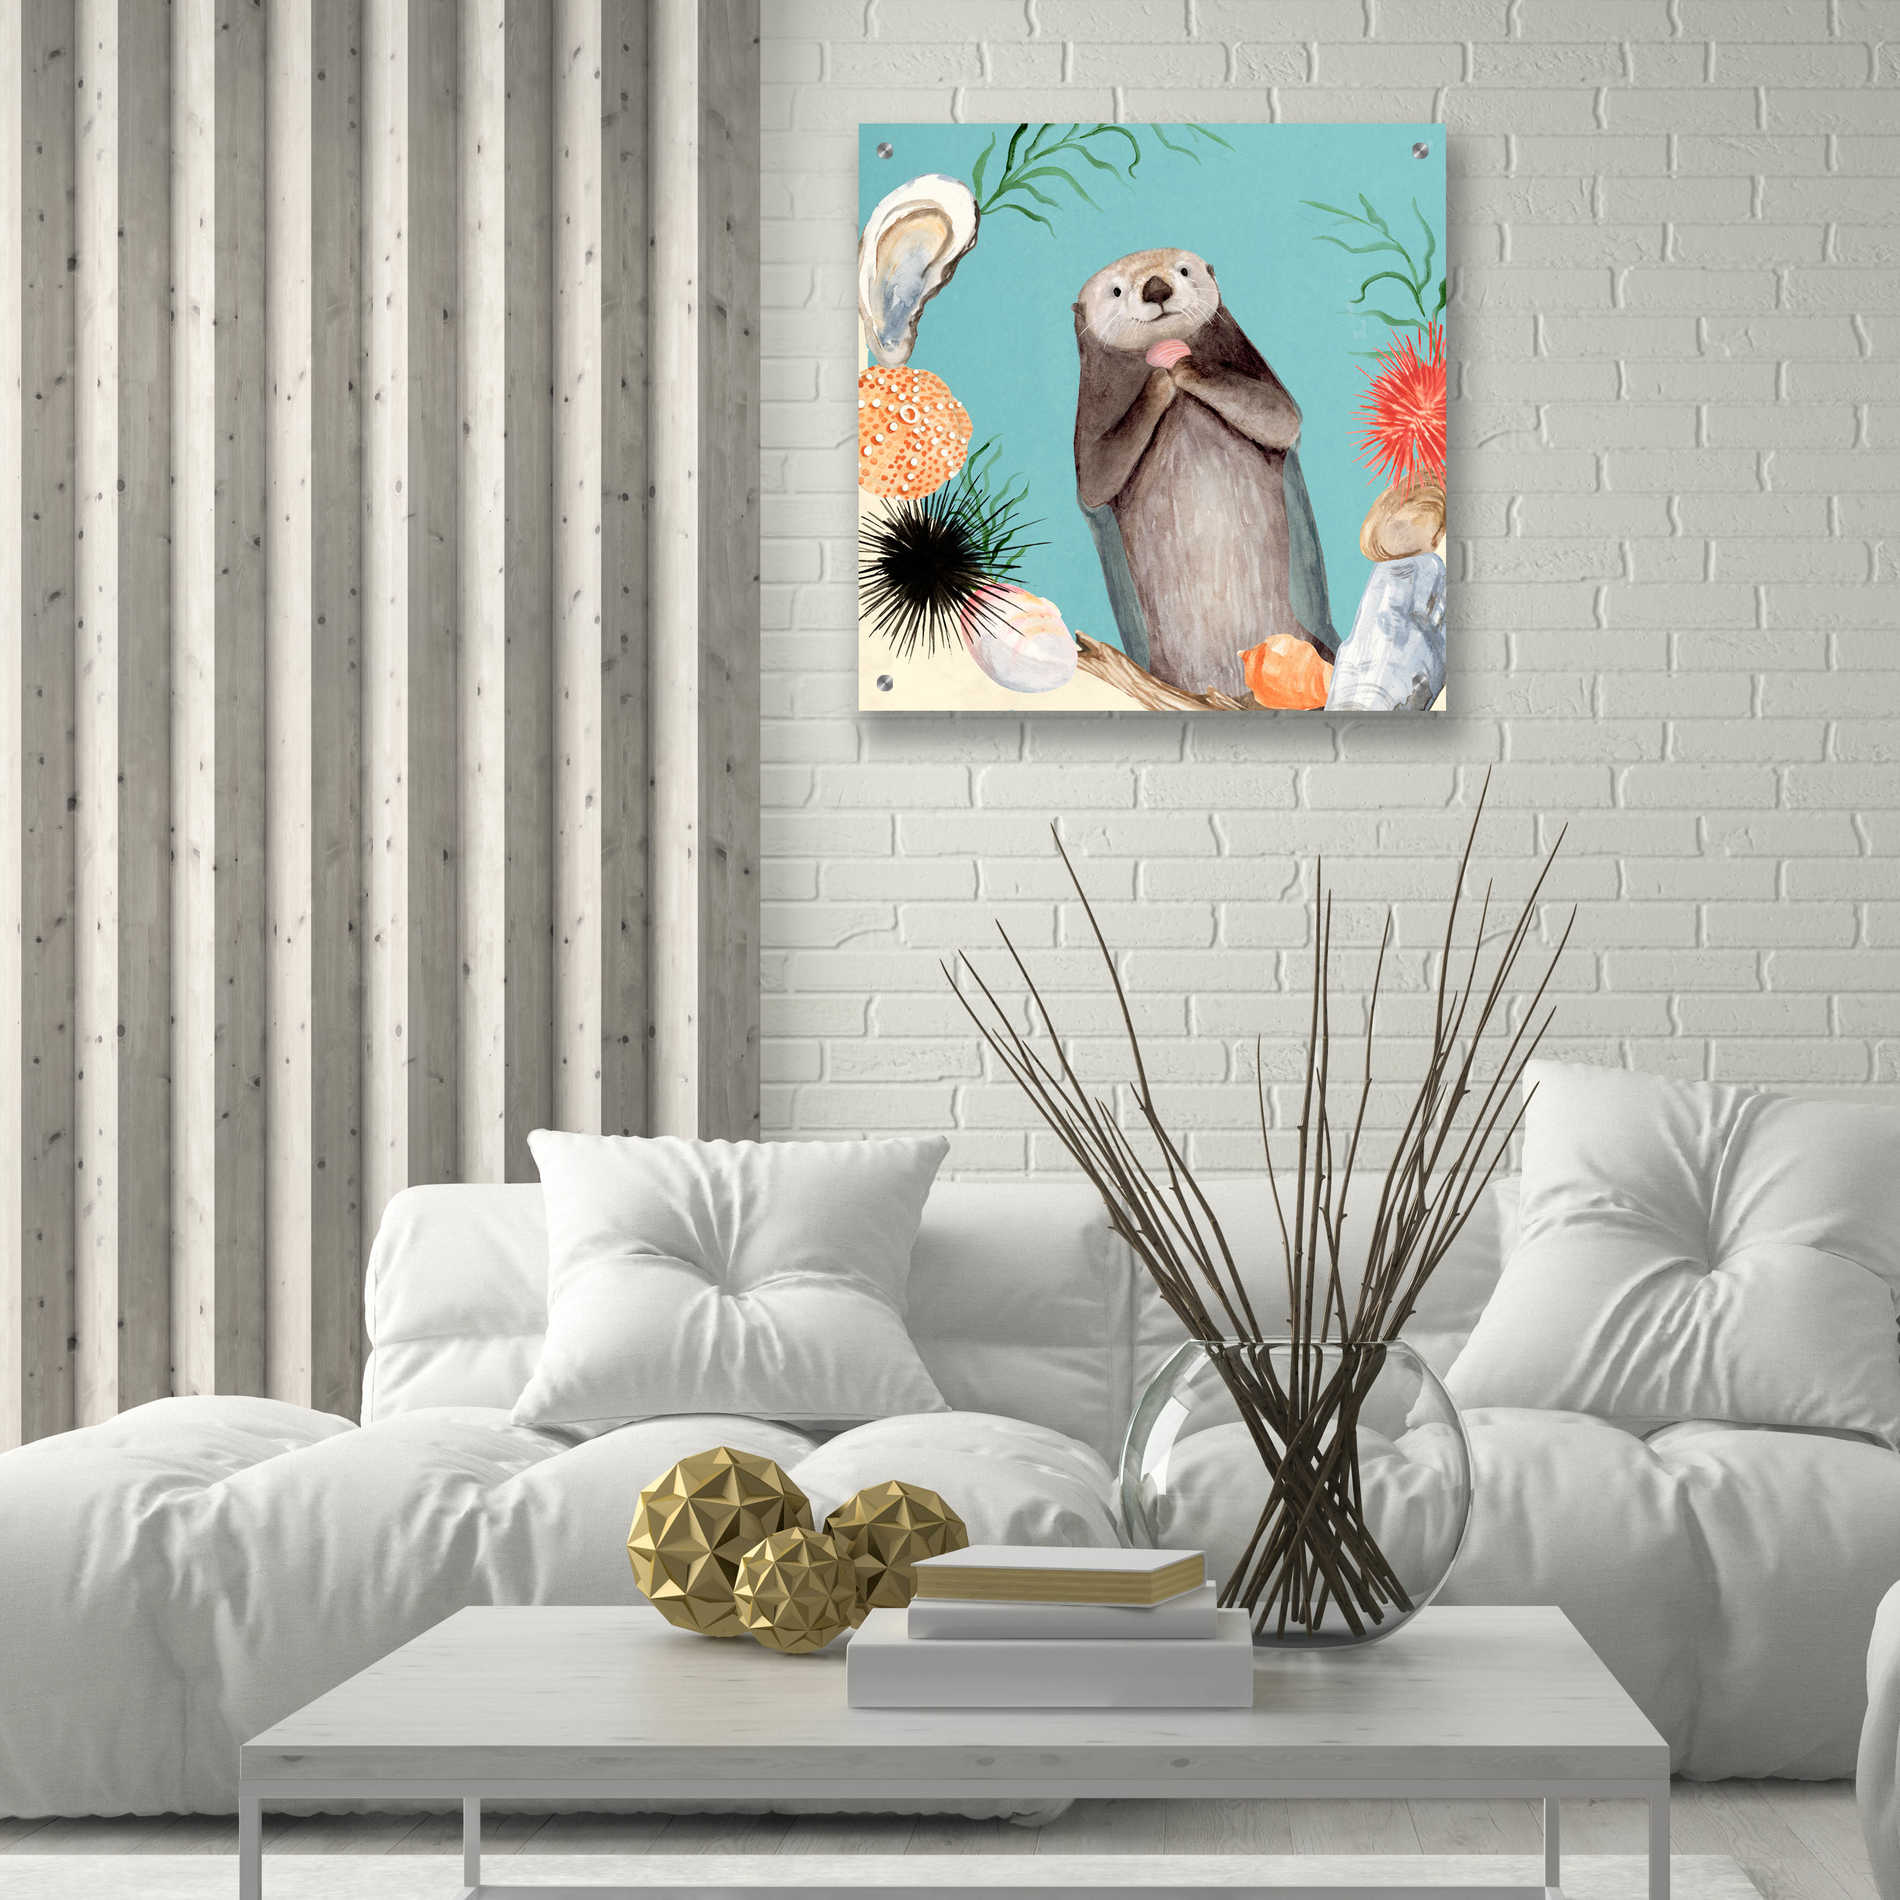 Epic Art 'Otter's Paradise II' by Victoria Borges, Acrylic Glass Wall Art,24x24